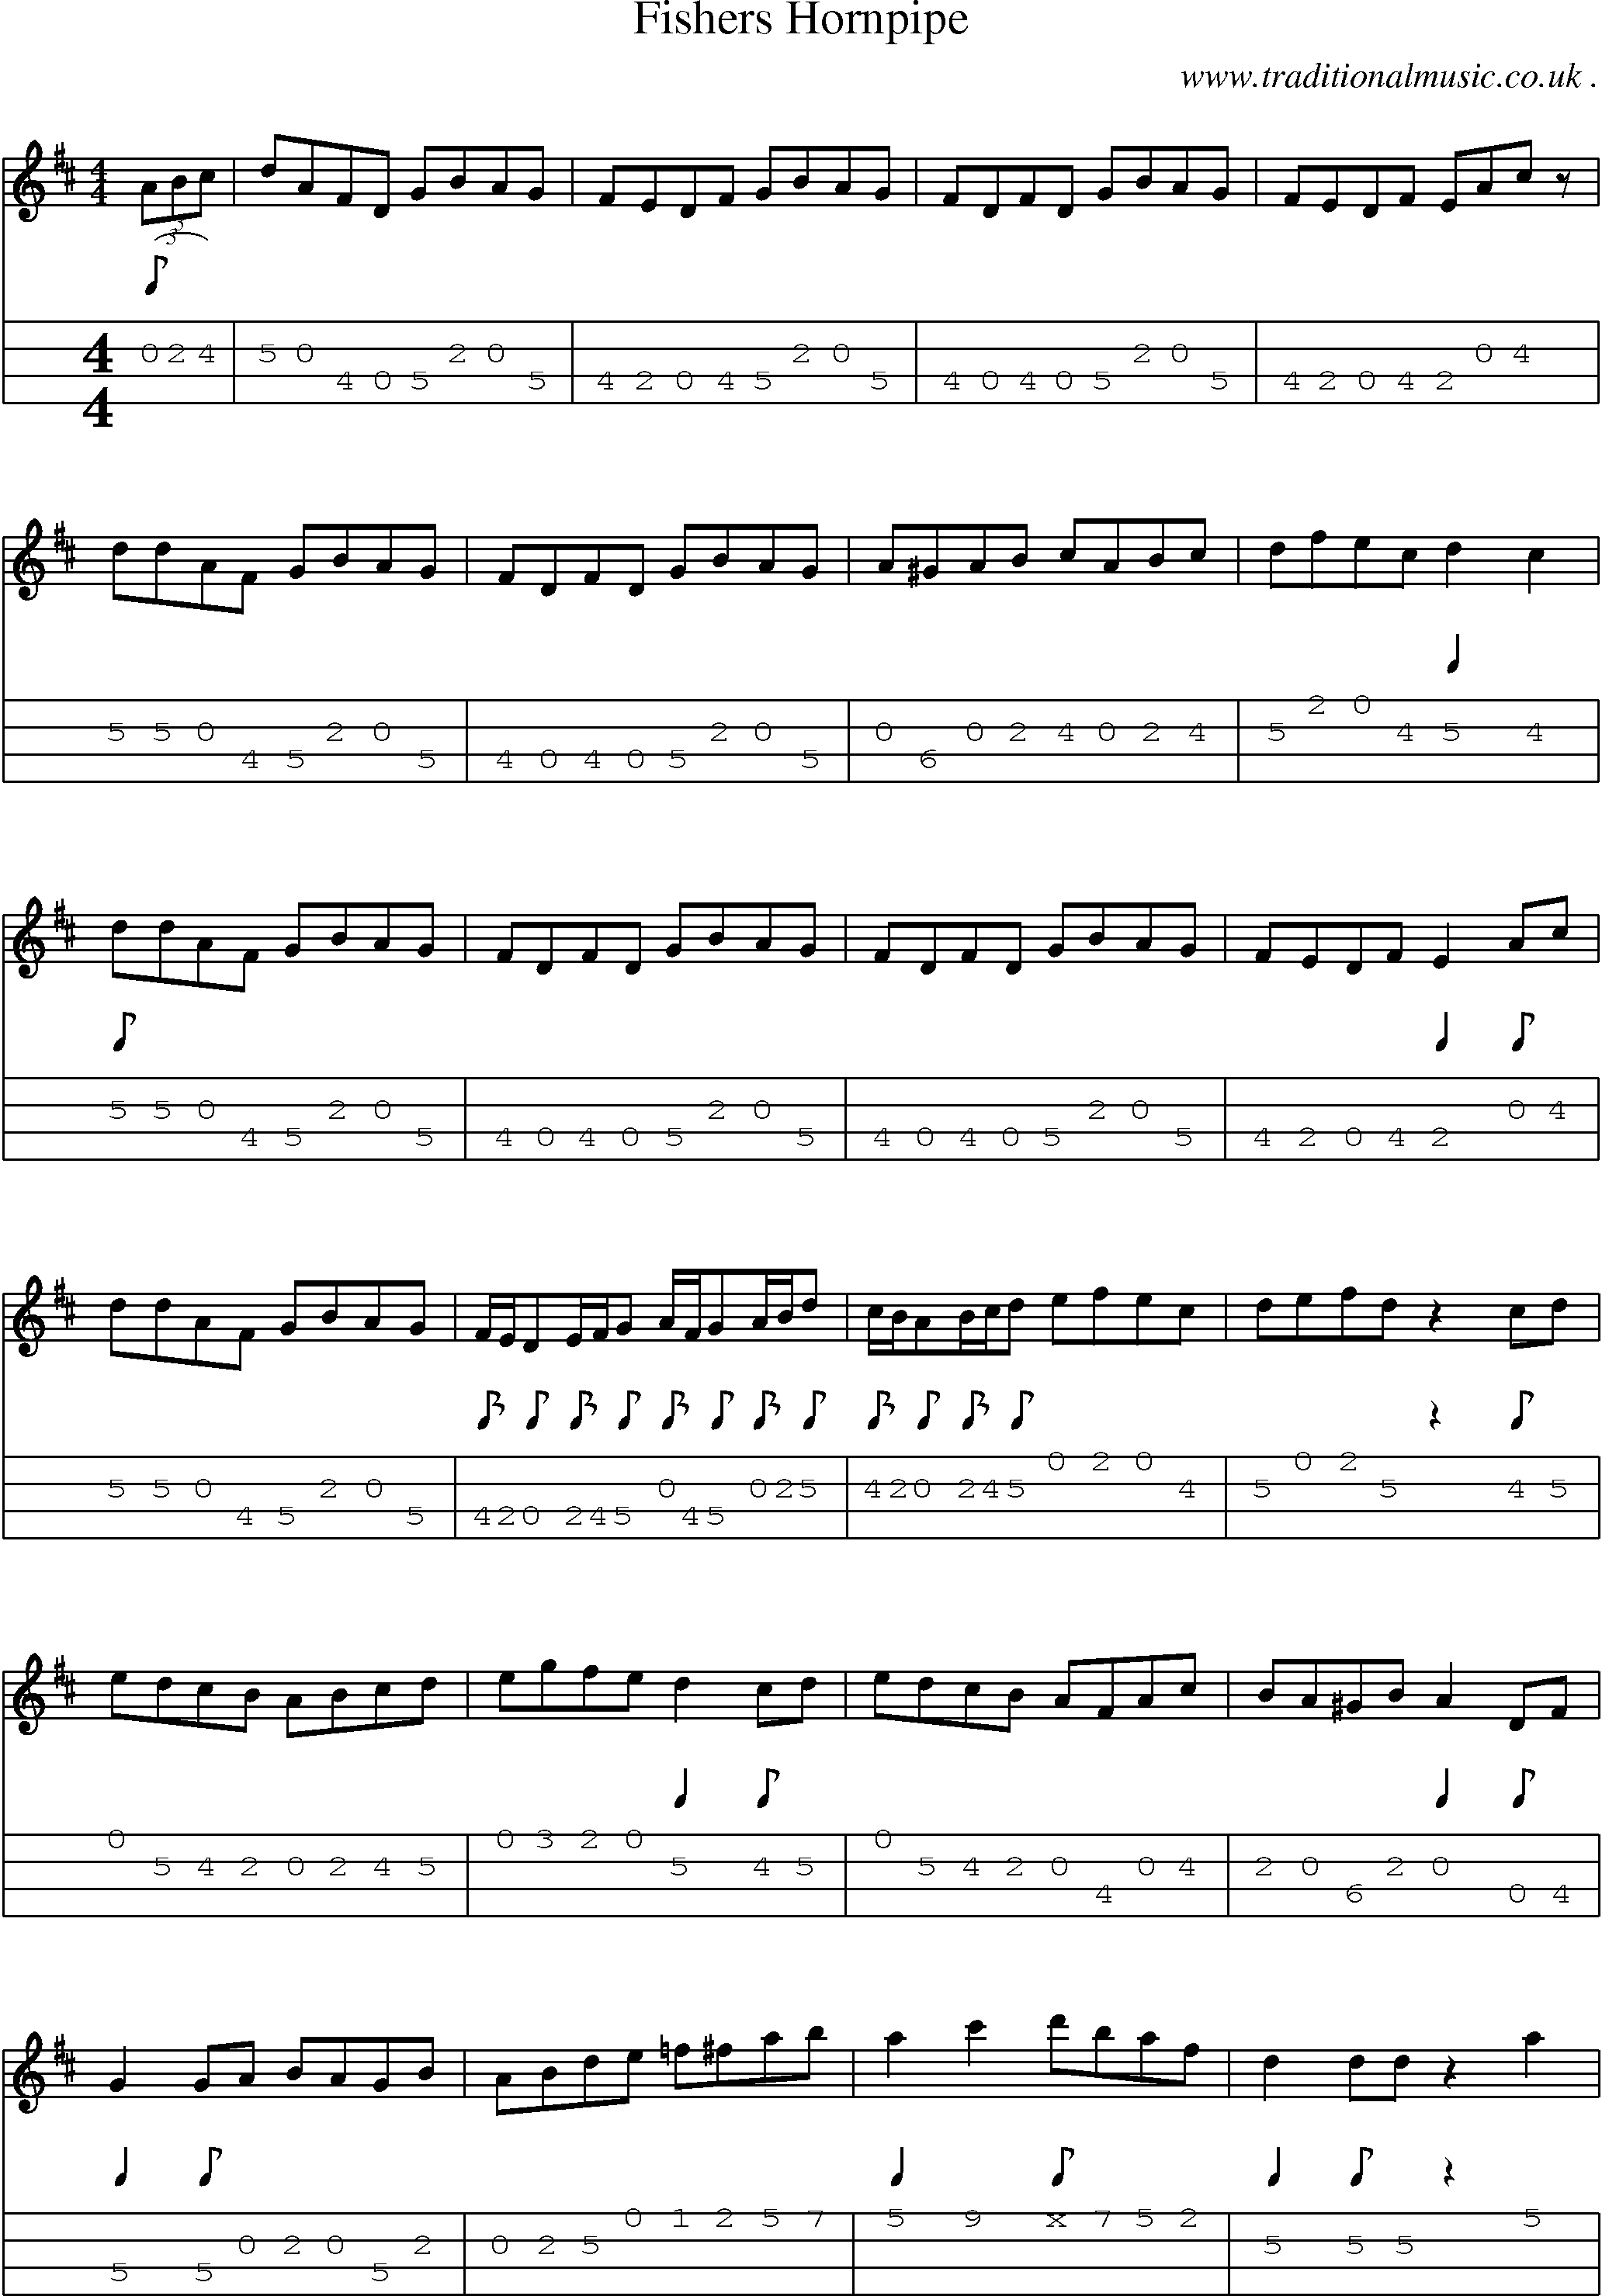 Music Score and Guitar Tabs for Fishers Hornpipe2